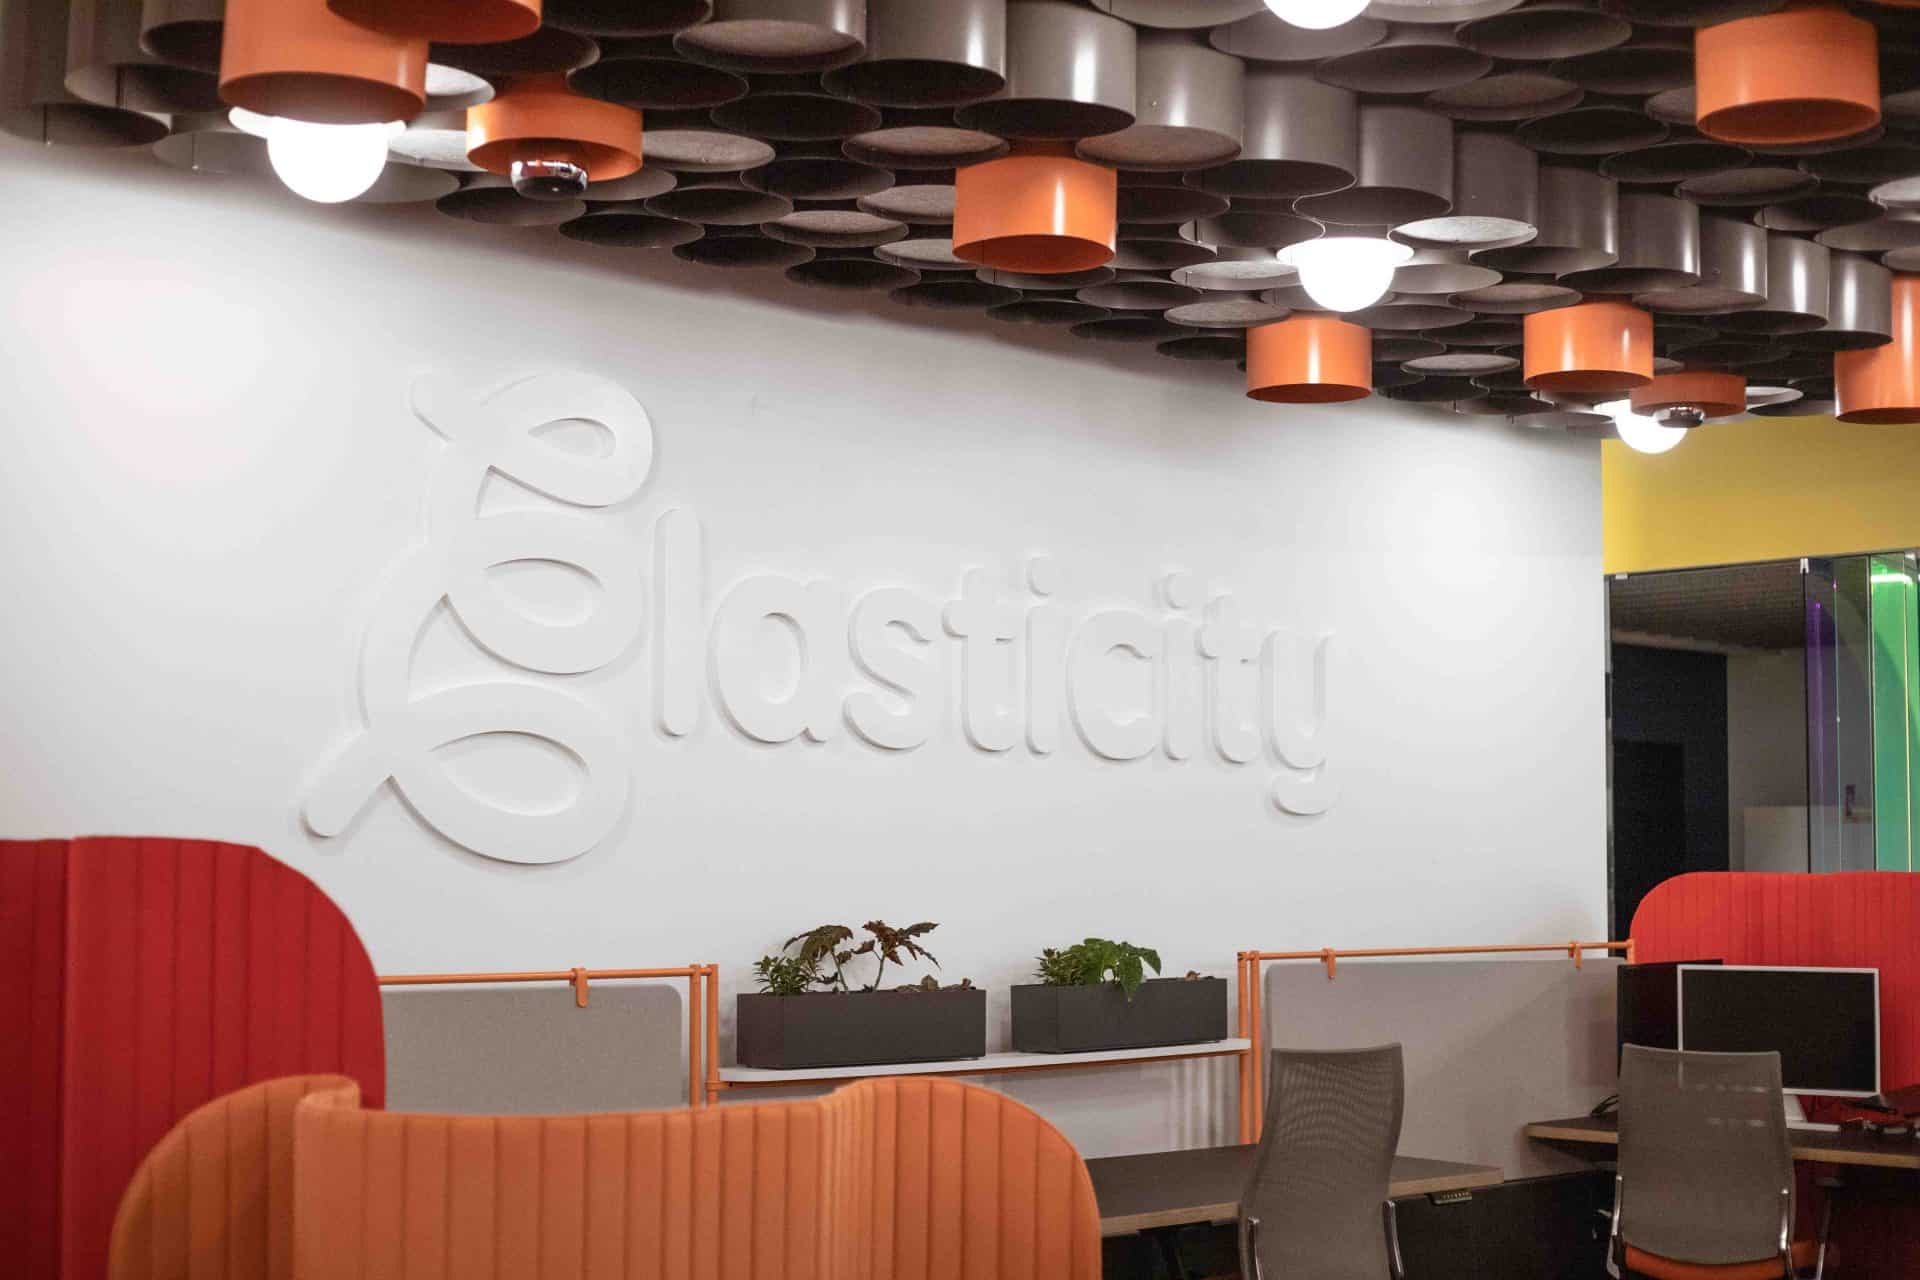 White on white Elasticity logo wall in their colorful office space